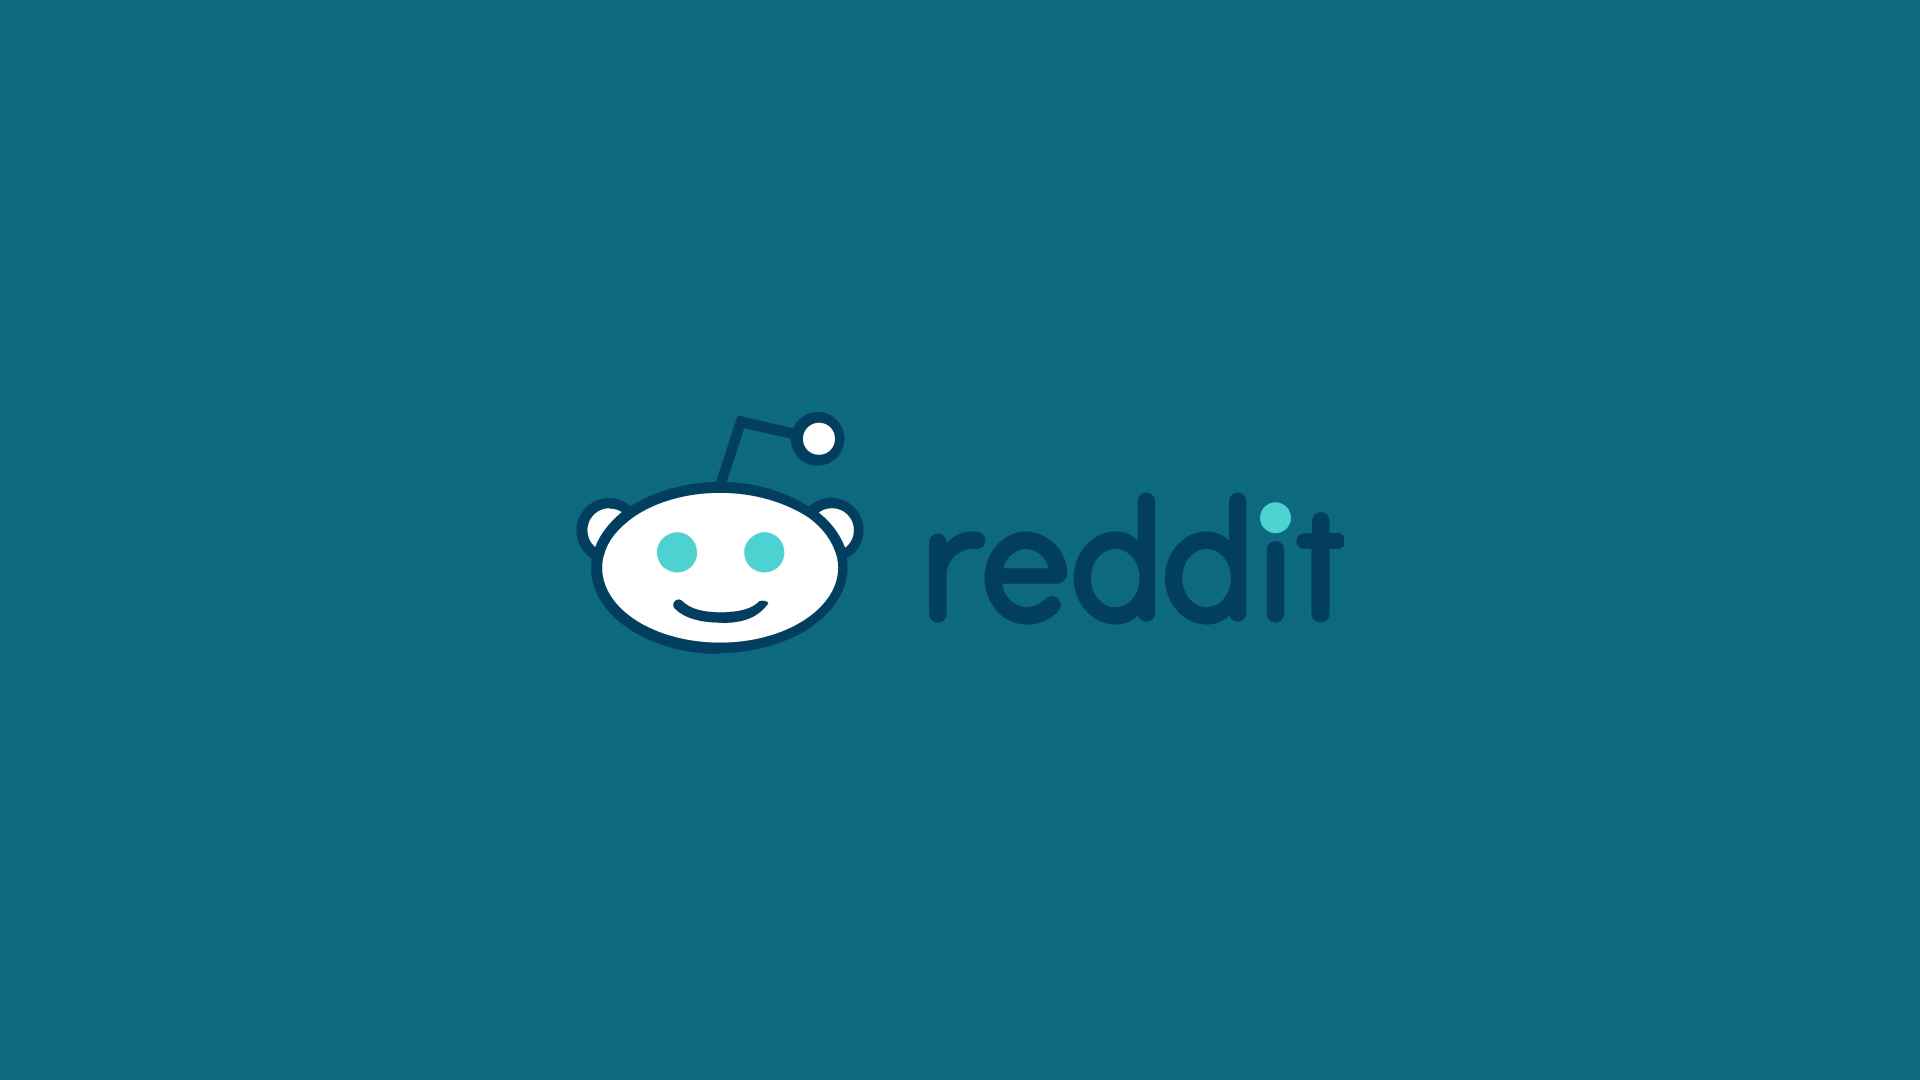 Are there any official Reddit apps available for mobile devices?